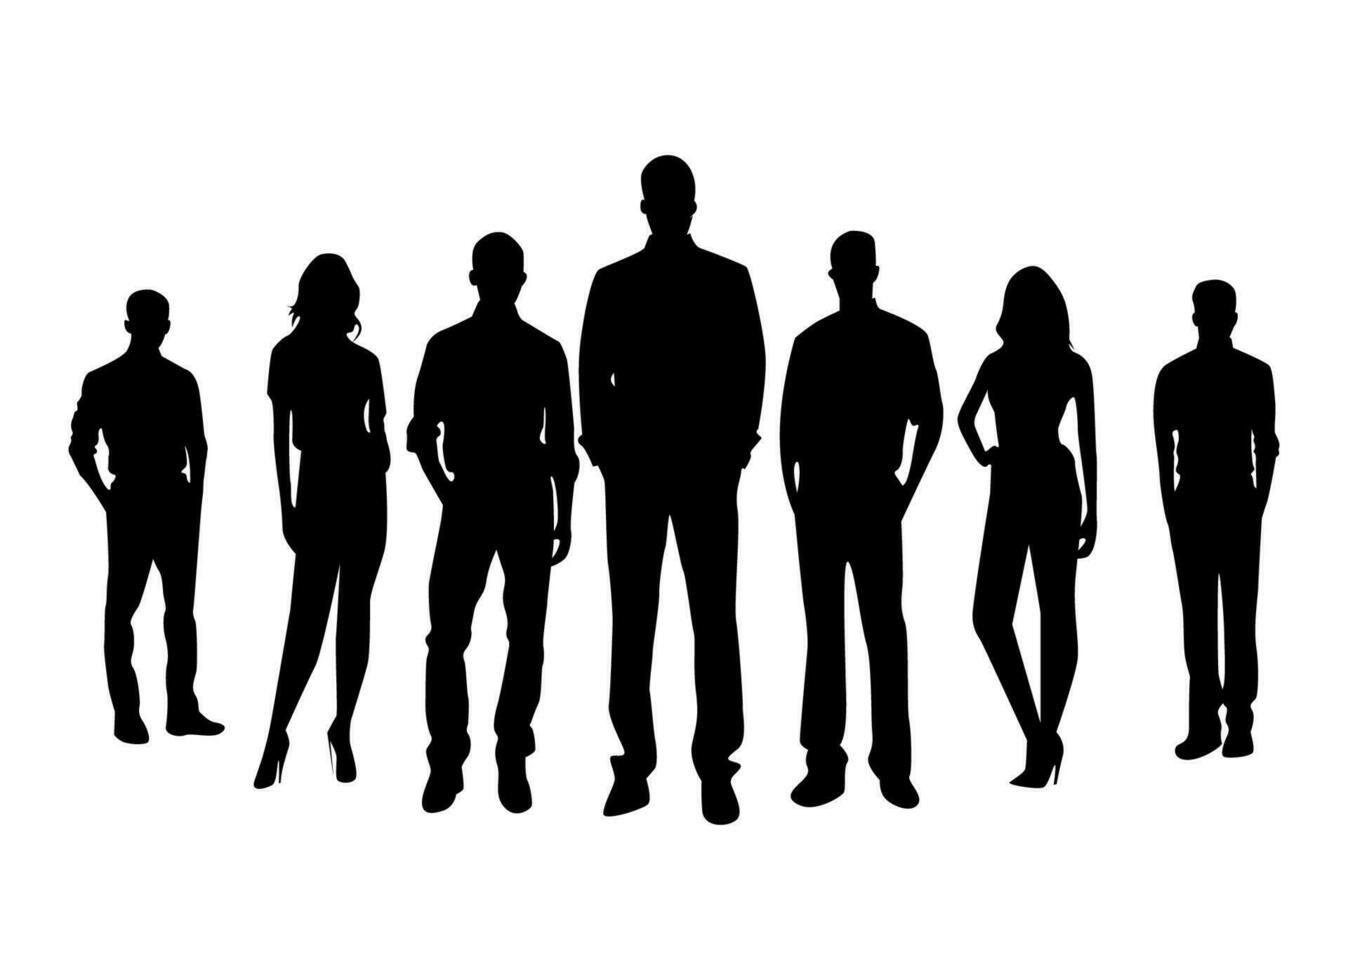 group of people silhouette icon set illustration vector